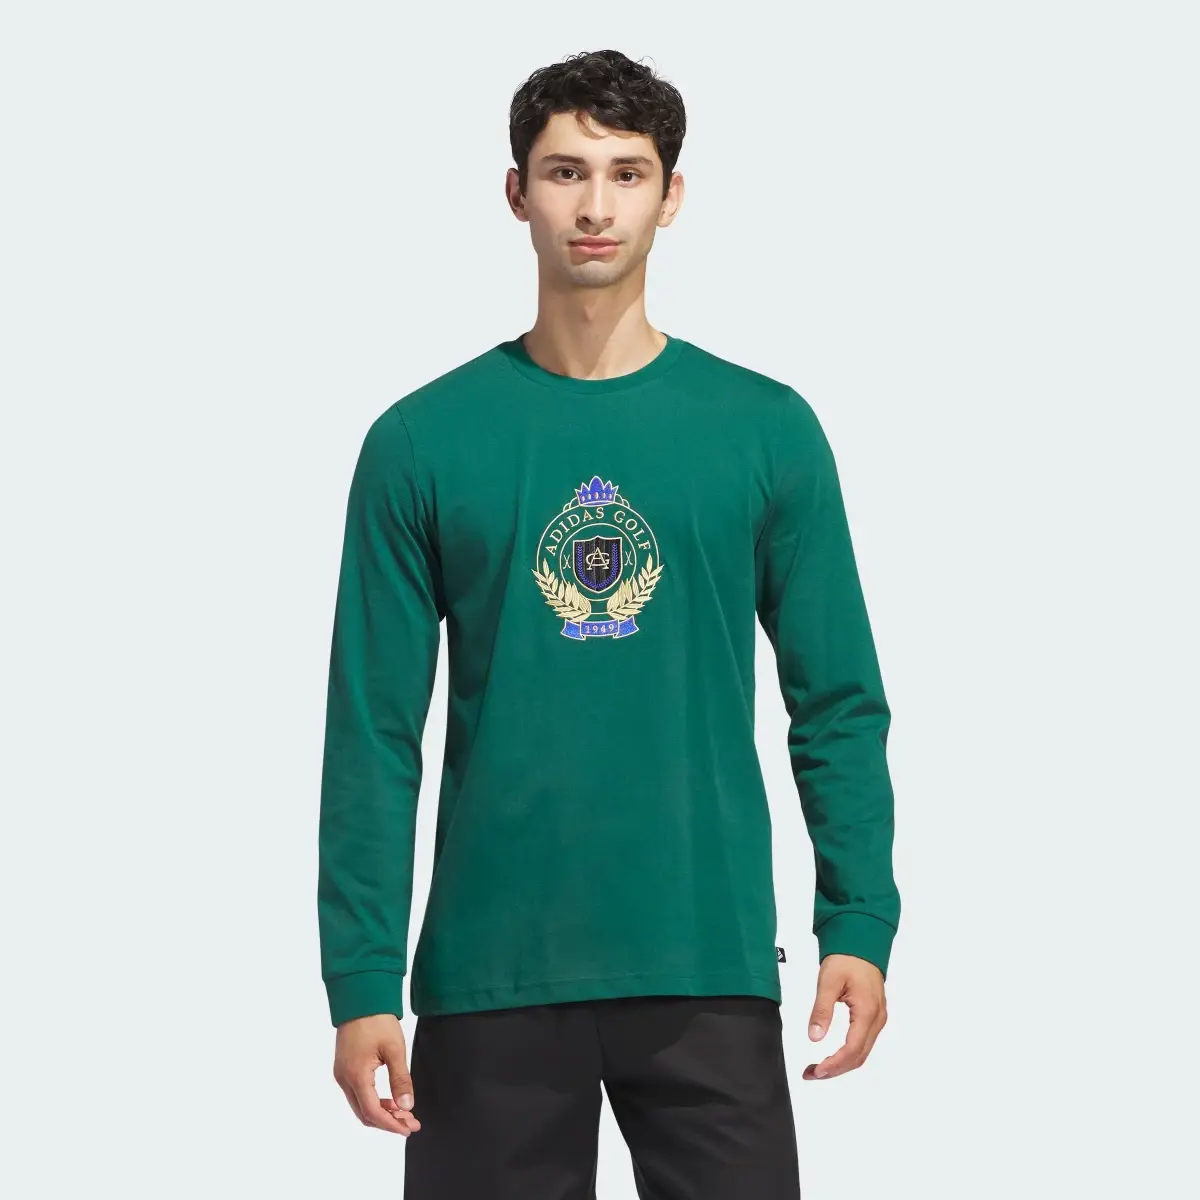 Adidas Go-To Crest Graphic Long Sleeve Tee. 2